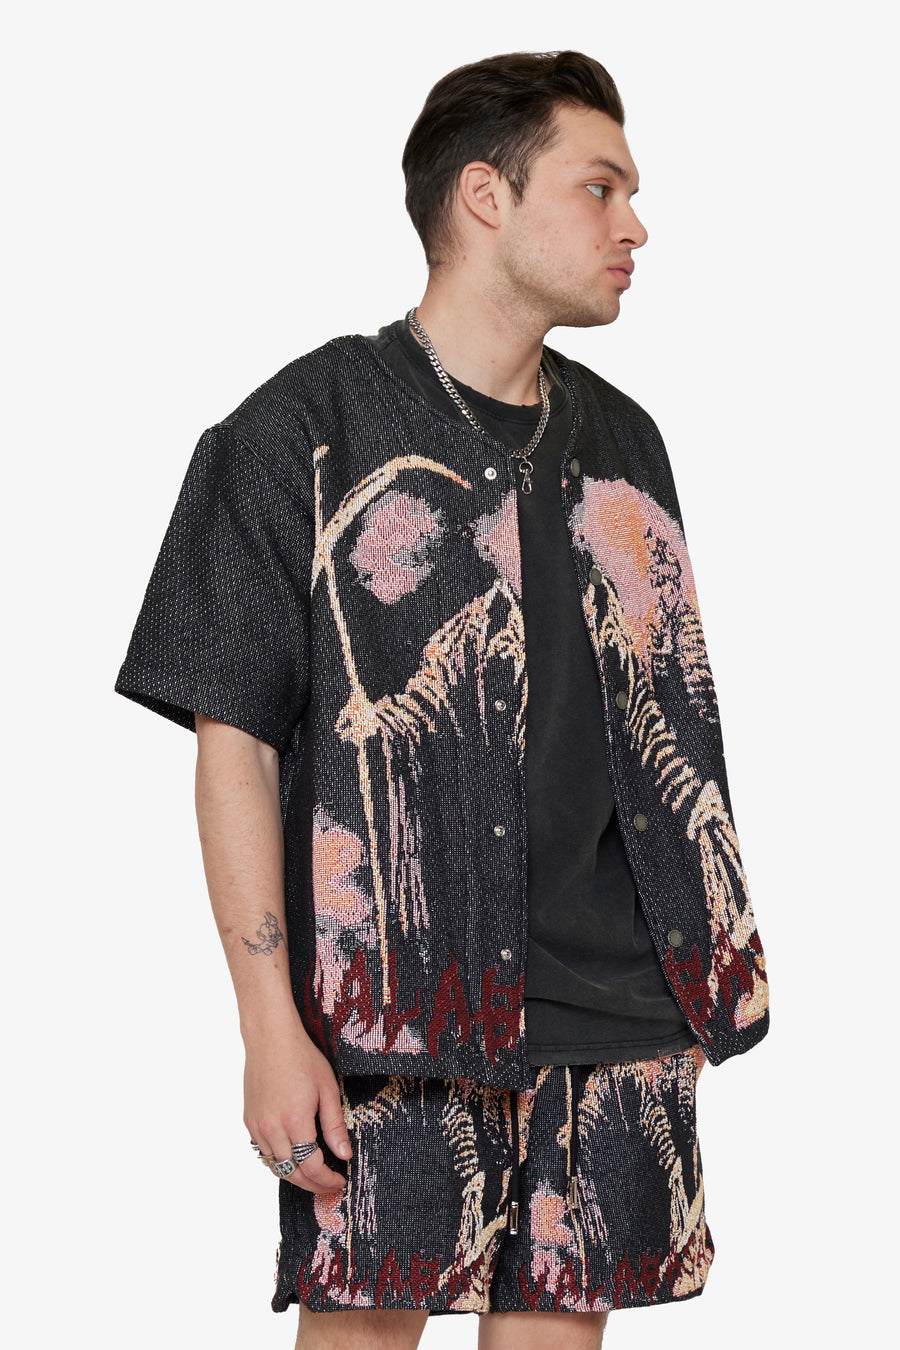 "GHOST HANDS" BLACK TAPESTRY BUTTON UP